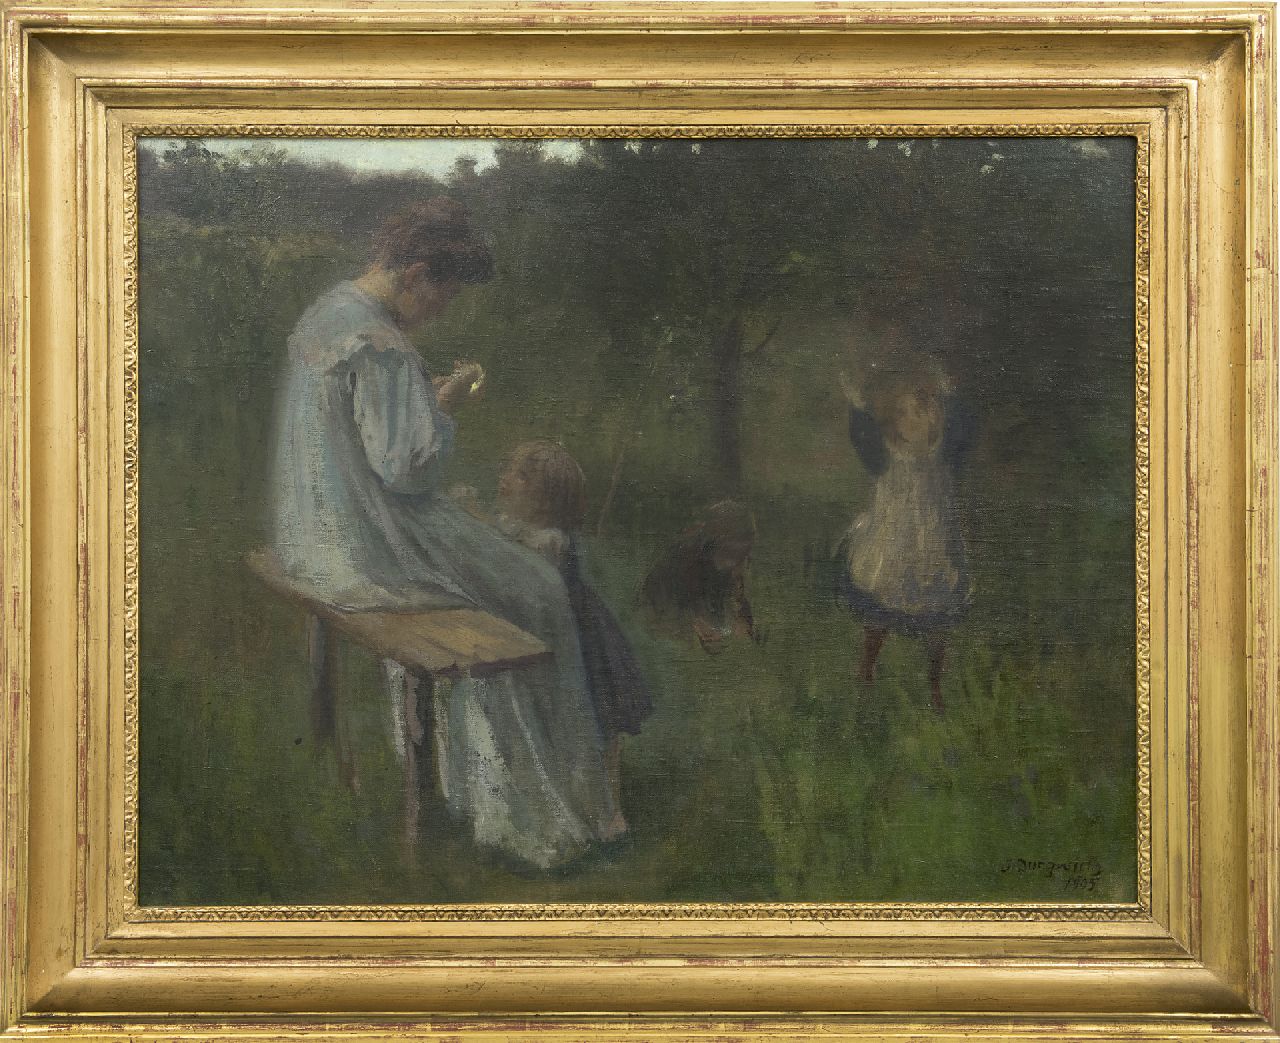 Jungwirth J.  | Joseph Jungwirth, A mother with playing children, oil on canvas 62.8 x 79.4 cm, signed l.r. and dated 1905